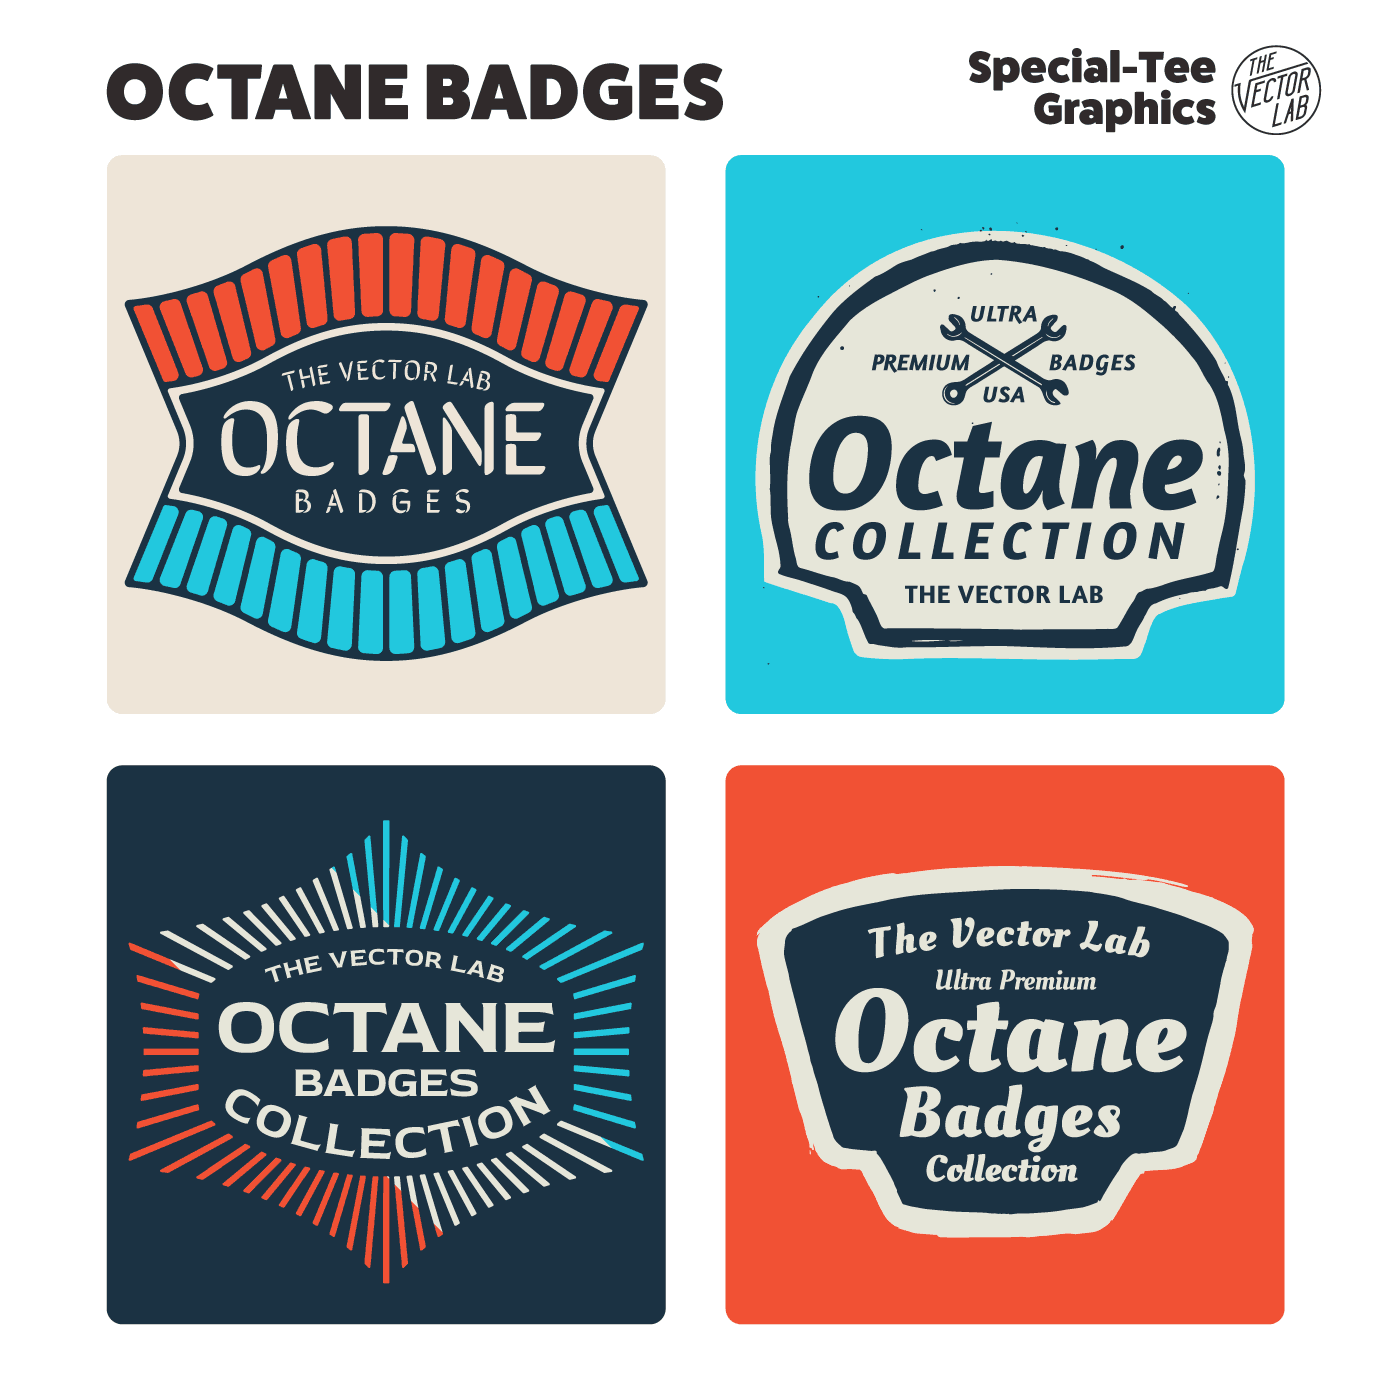 Octane Badges - Motorcycle and Auto Inspired